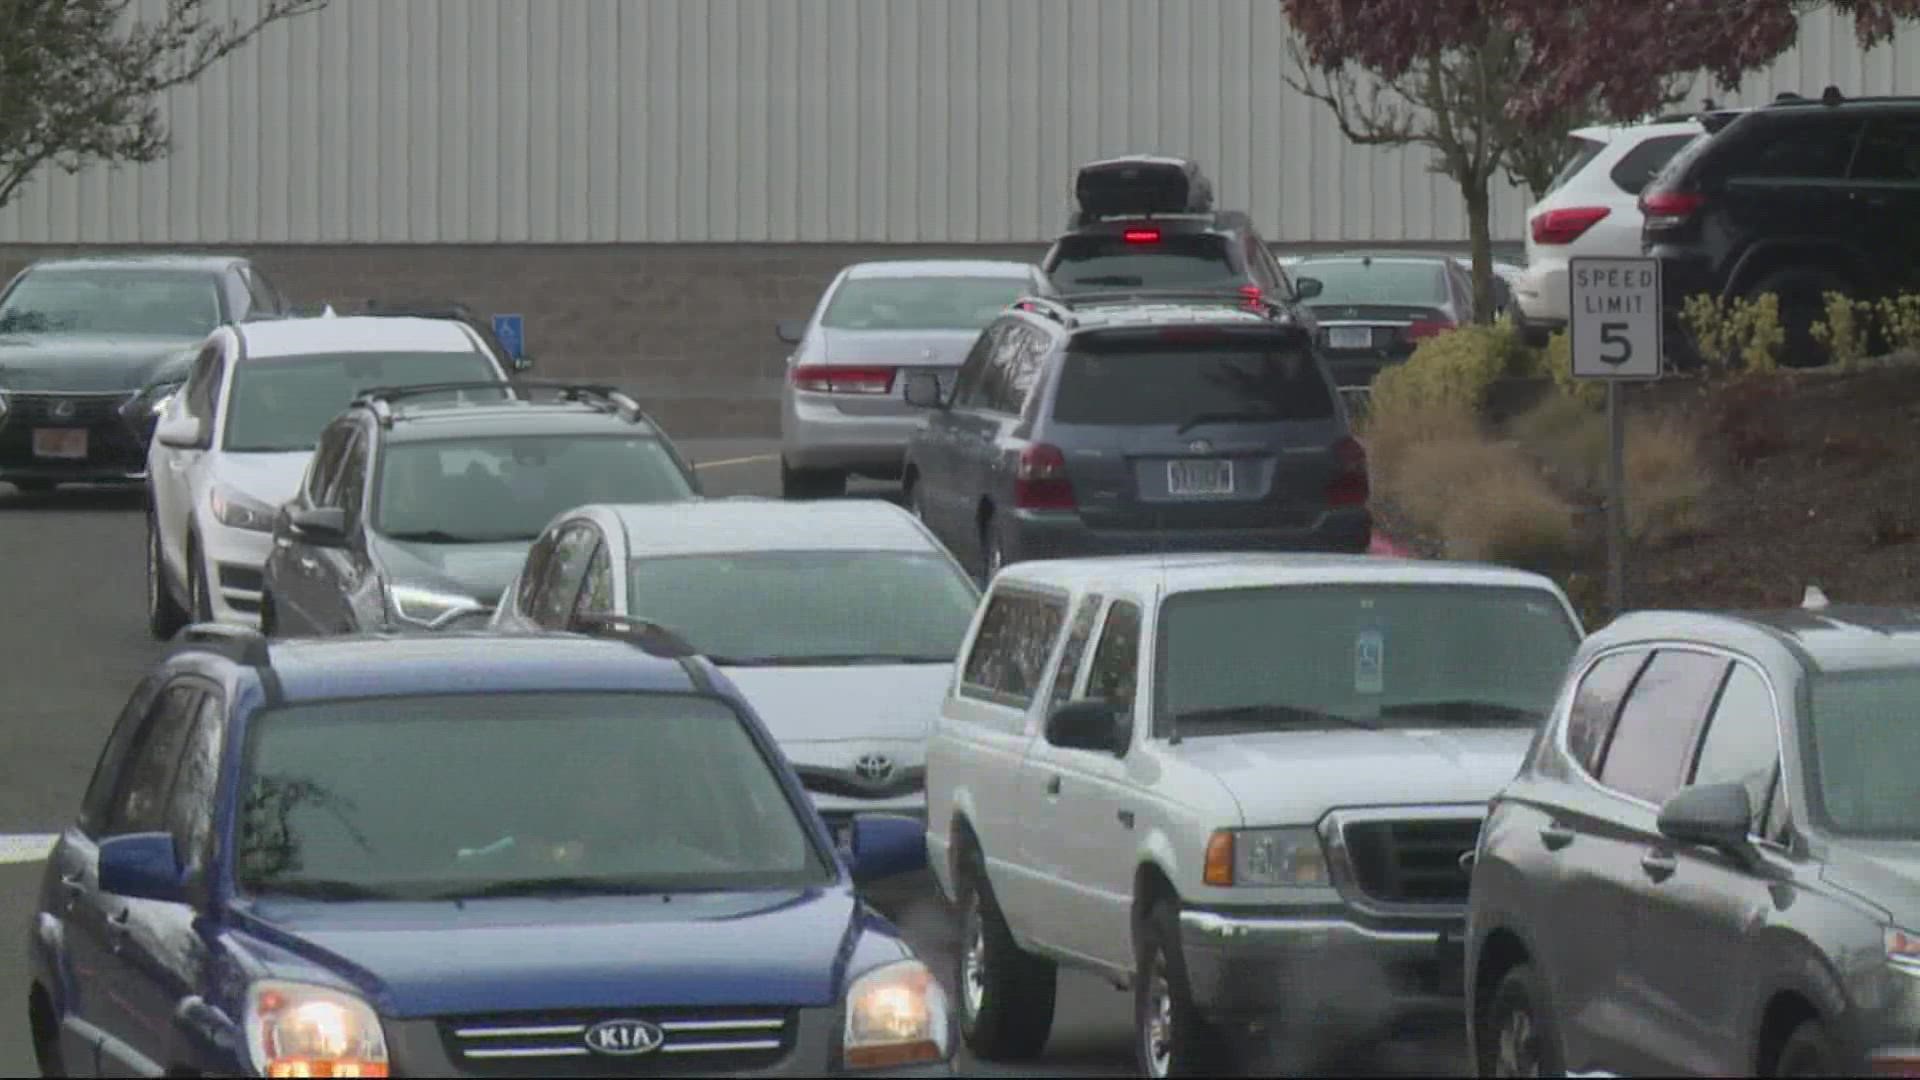 Finding a parking spot during the holidays can be downright stressful. KGW's Chris McGinness explains how to make it easier.